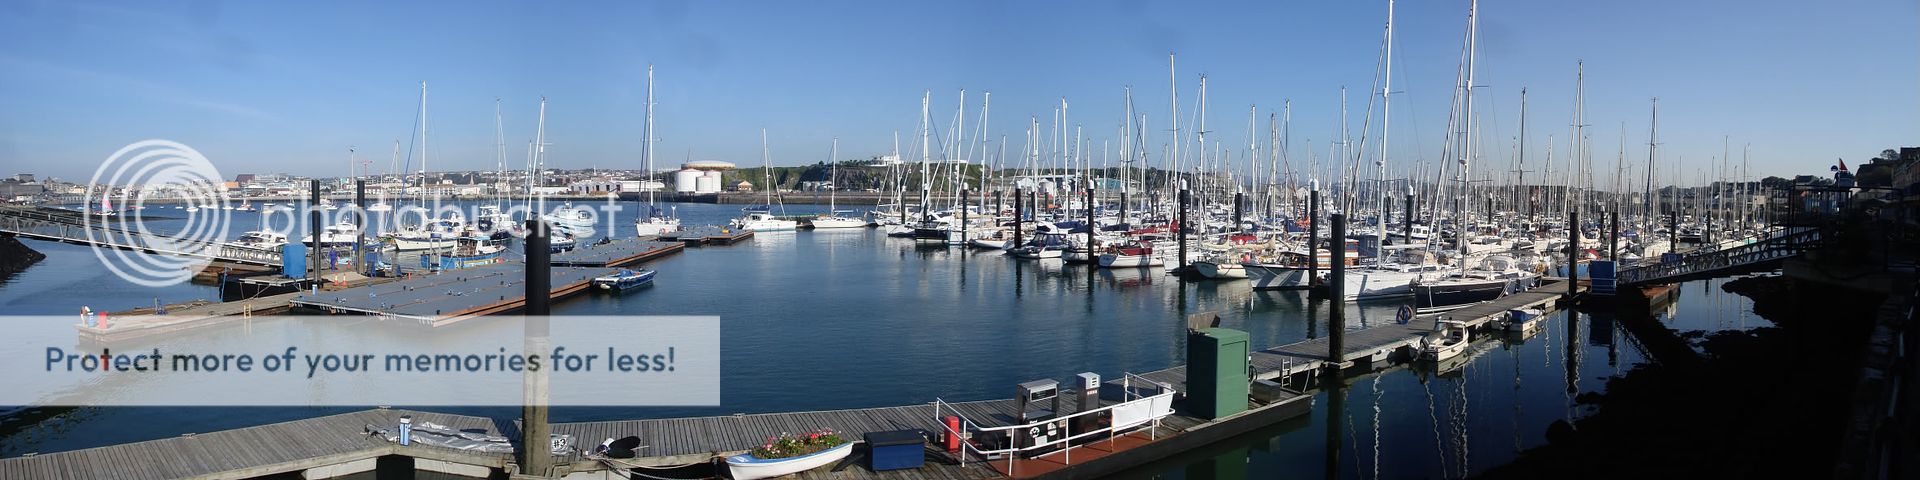 20081012PlymouthYachtHaven2Panorama.jpg